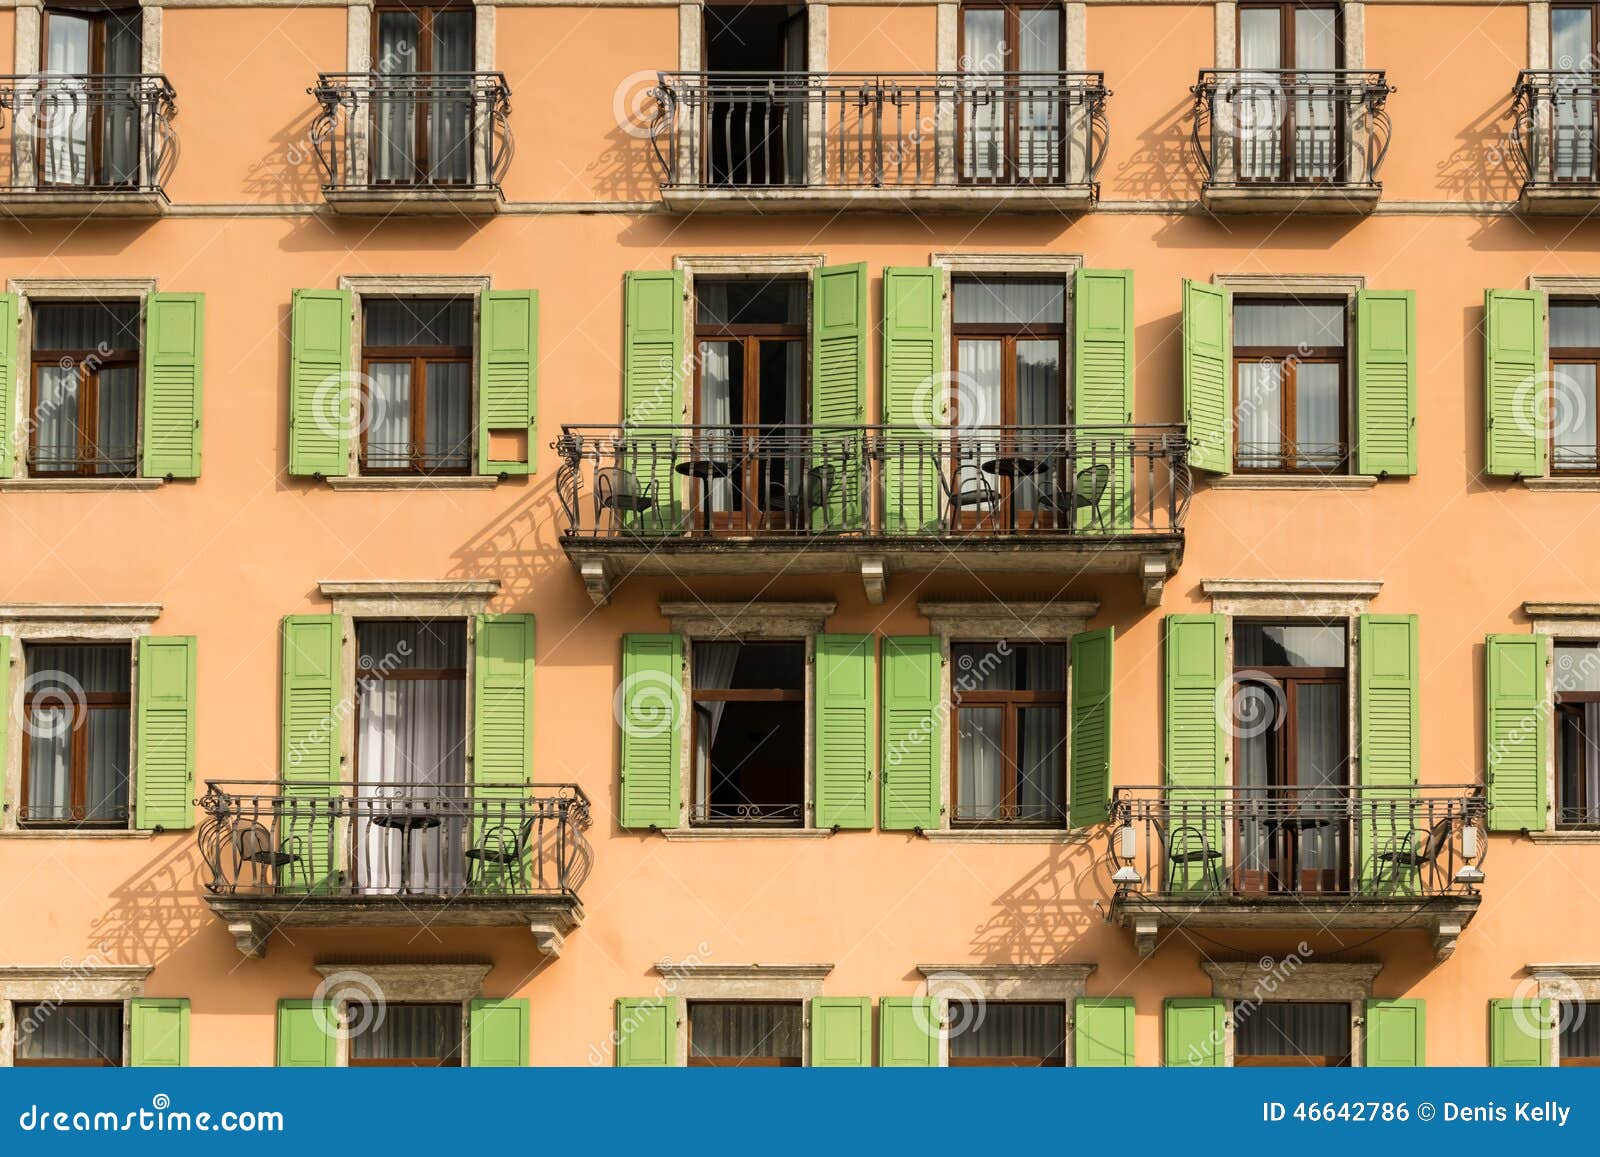 shuttered windows in italy